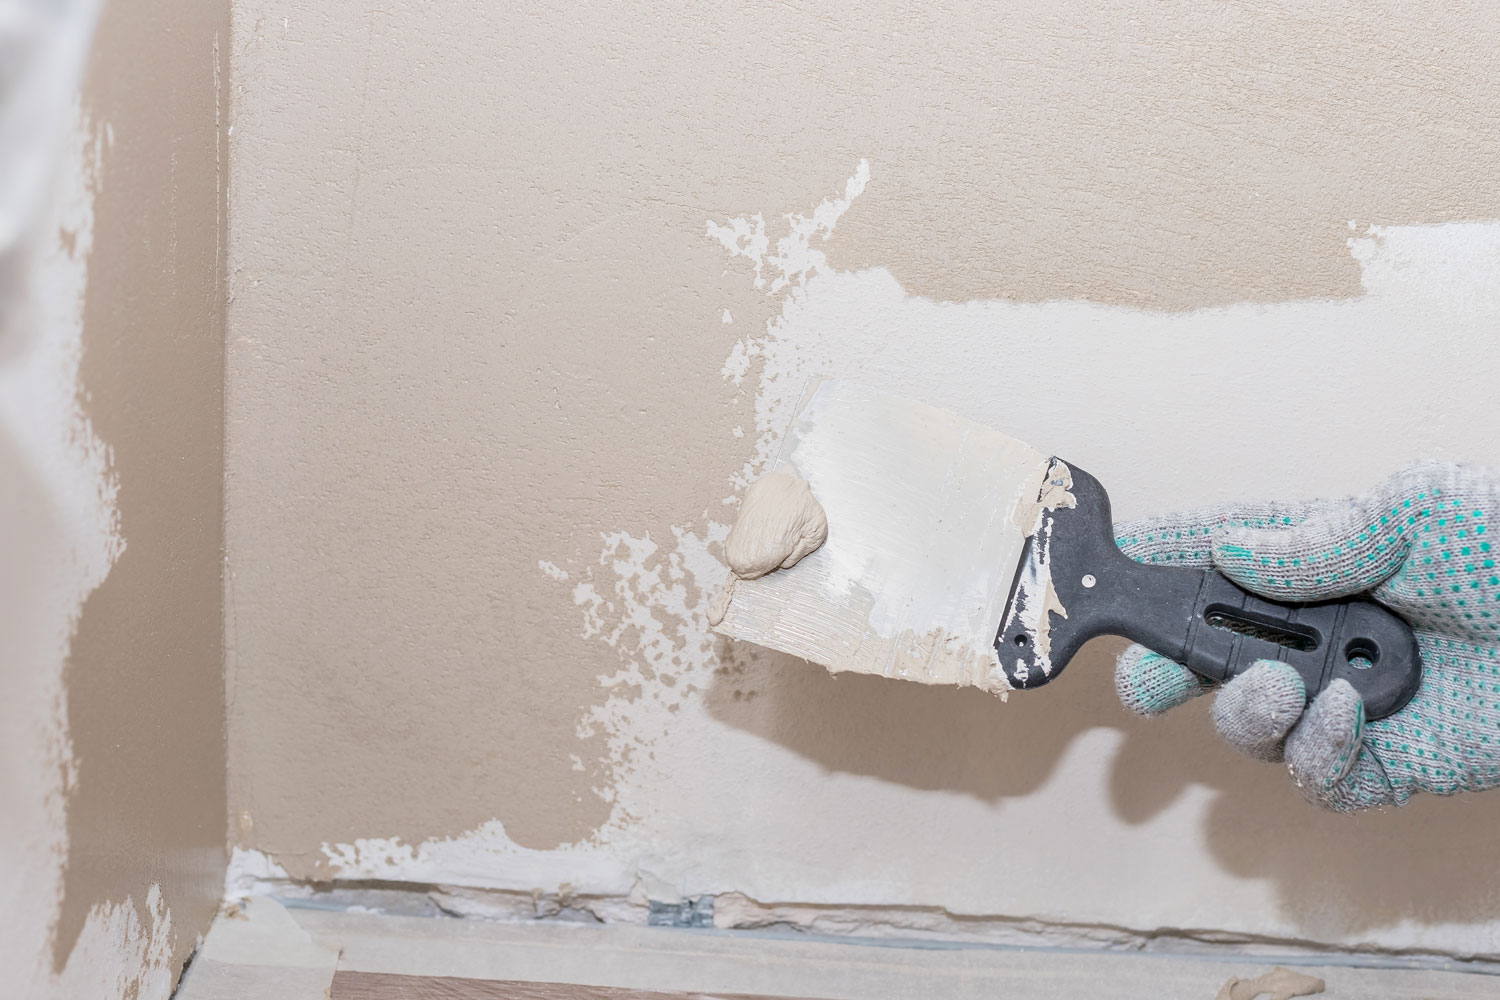 Great places to mount putty, Does mounting putty damage walls? and how to remove it